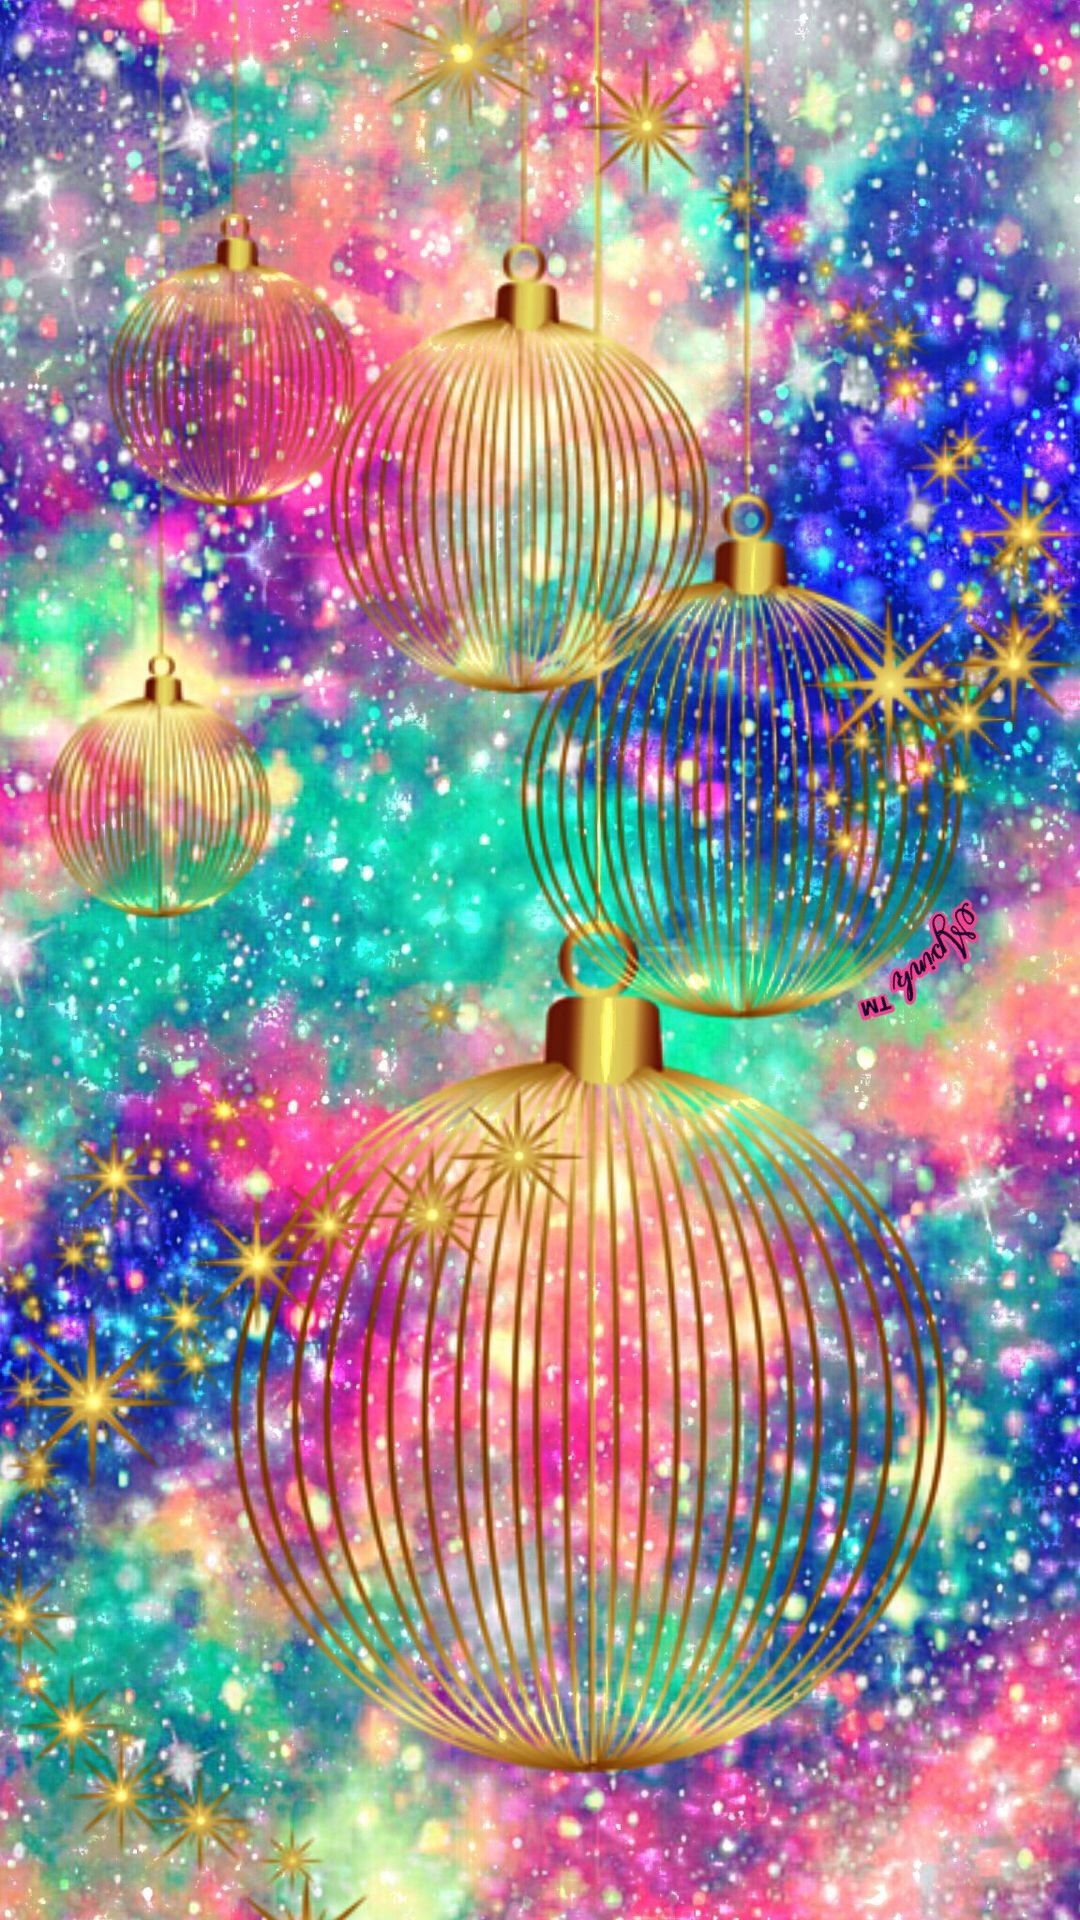 Unique iPhone Wallpaper Home Screen with high-resolution 1080x1920 pixel. You can set as wallpaper for Apple iPhone X, XS Max, XR, 8, 7, 6, SE, iPad. Enjoy and share your favorite HD wallpapers and background images